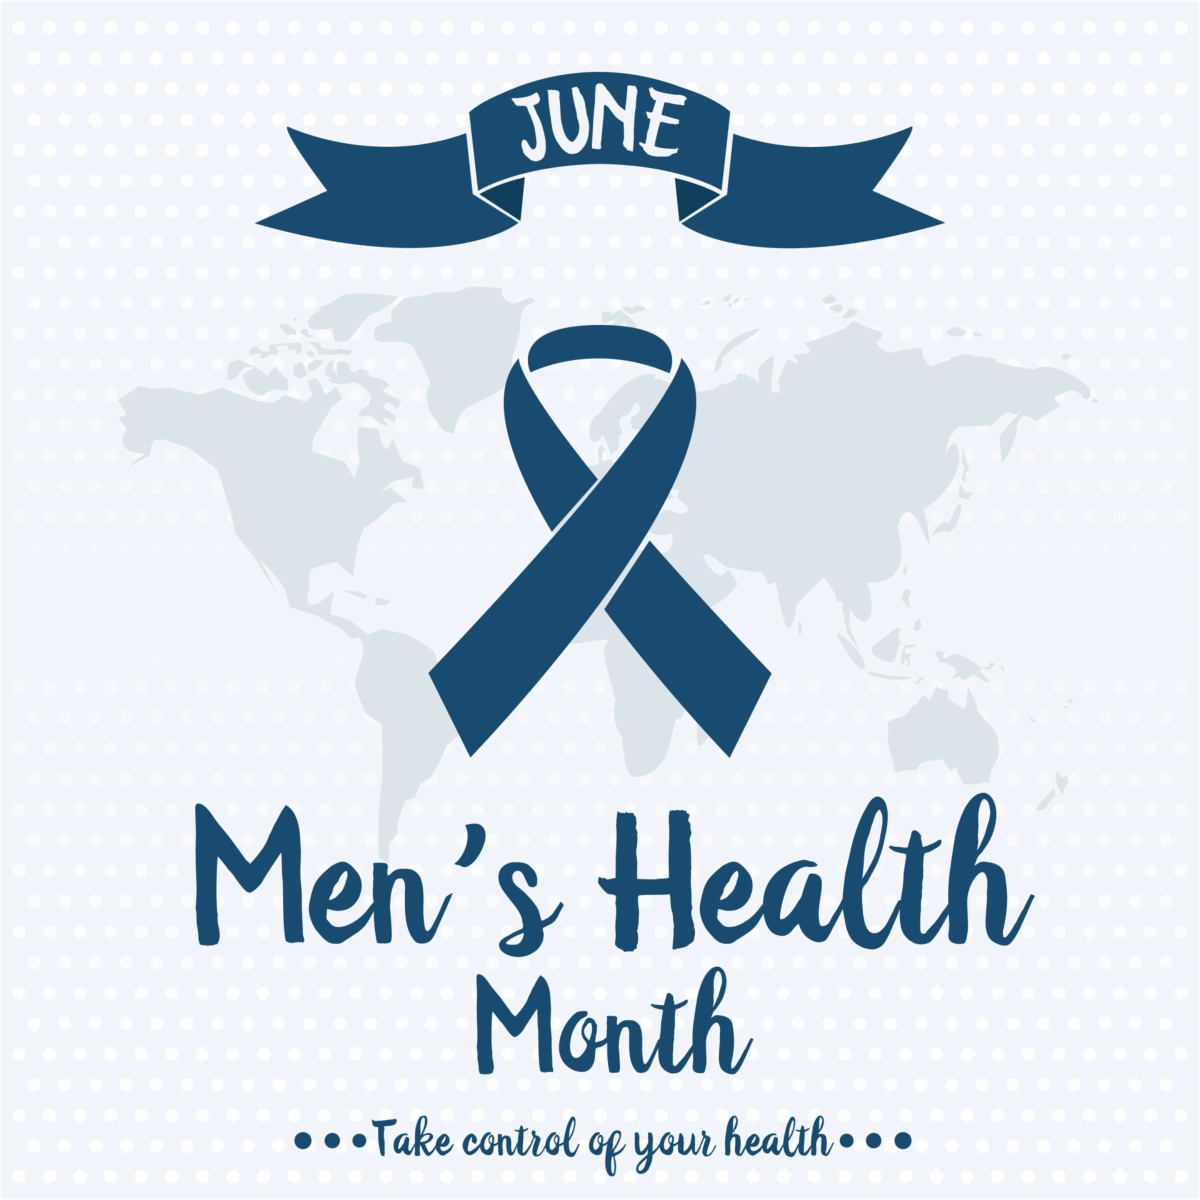 Men’s Health Month 

Men also experience unique health changes and conditions that affect their daily life. This Men’s Health Month, we are encouraging all men to prioritize their health above anything else.

#HealthcareStaffing #MensHealthMonth #SkokieIL